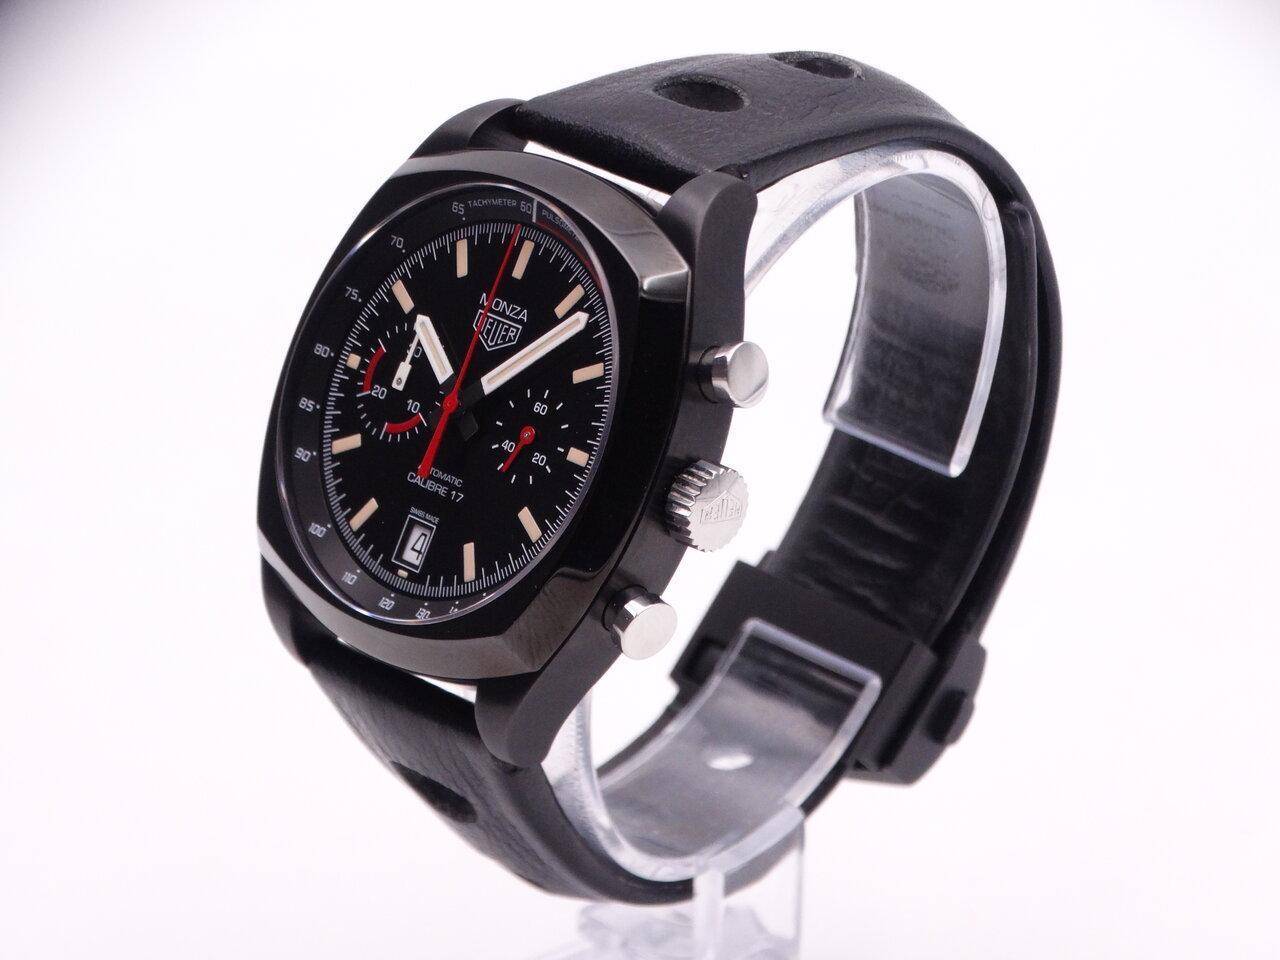 Tag Heuer Monza Chronograph Limited Edition 08942.JPG